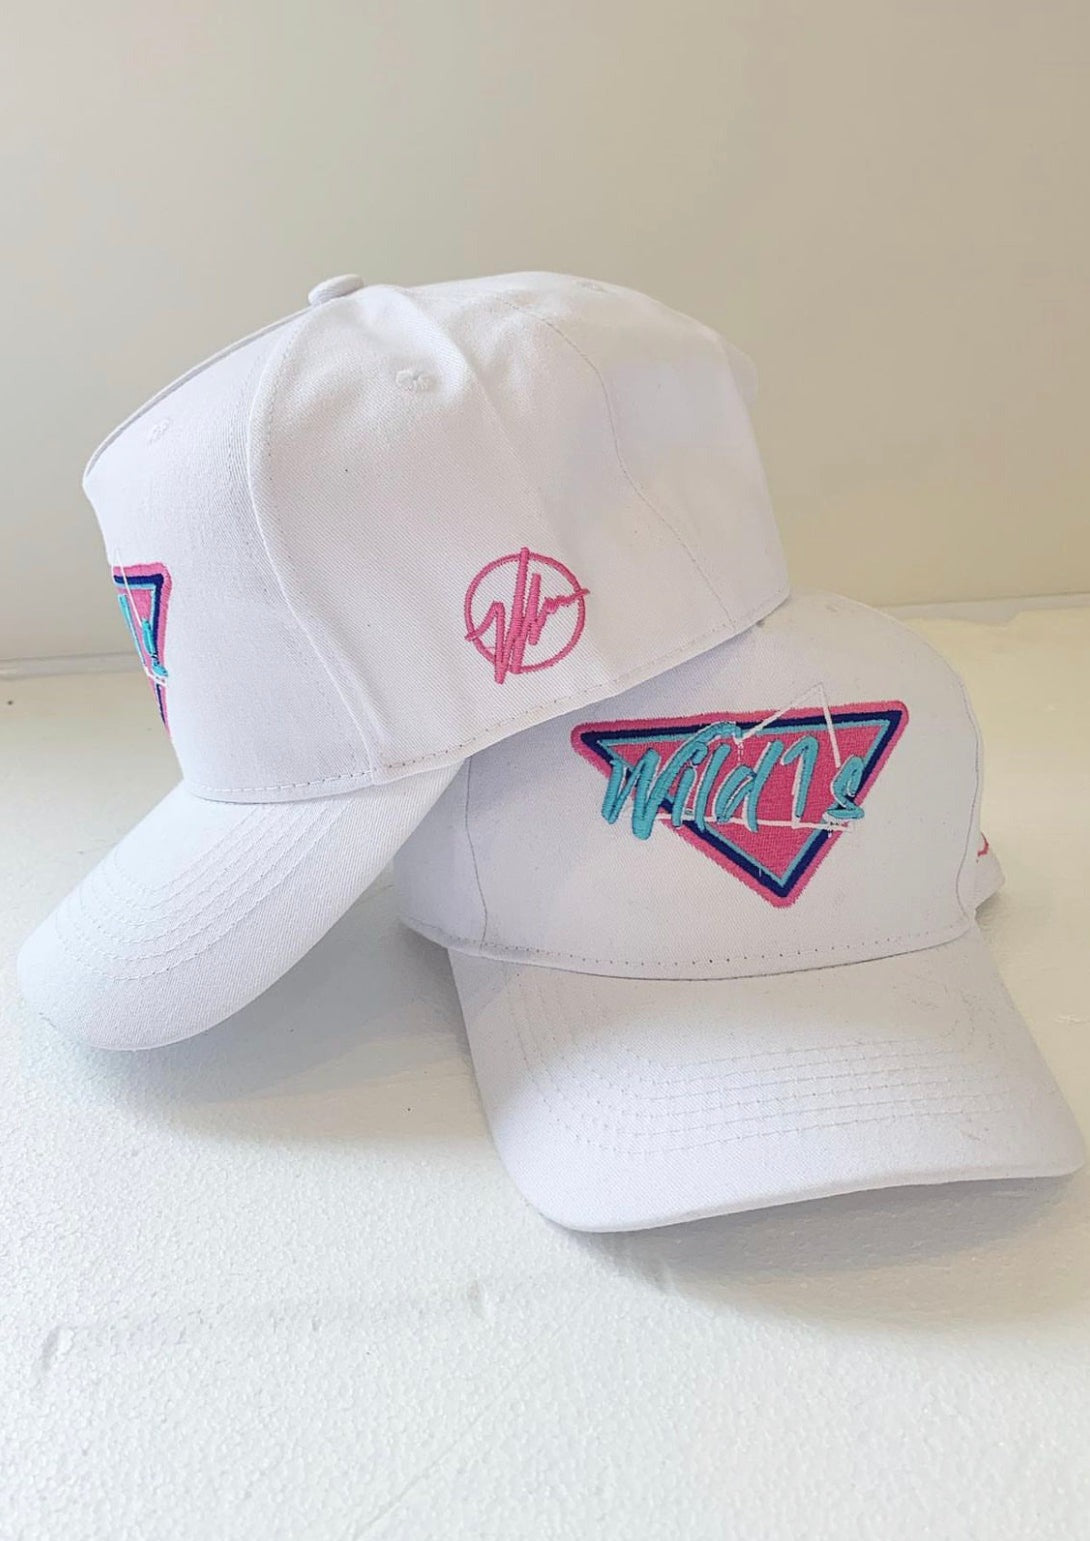 Wild1s 'Jellytip' Unisex Cap The OG adjustable snapback cap, with a deeper fit, thats totally adjustable to fit guys and girls. Designed locally, and made from 100% cotton featuring the Wild1s logo.  Available in other colours and fabrics